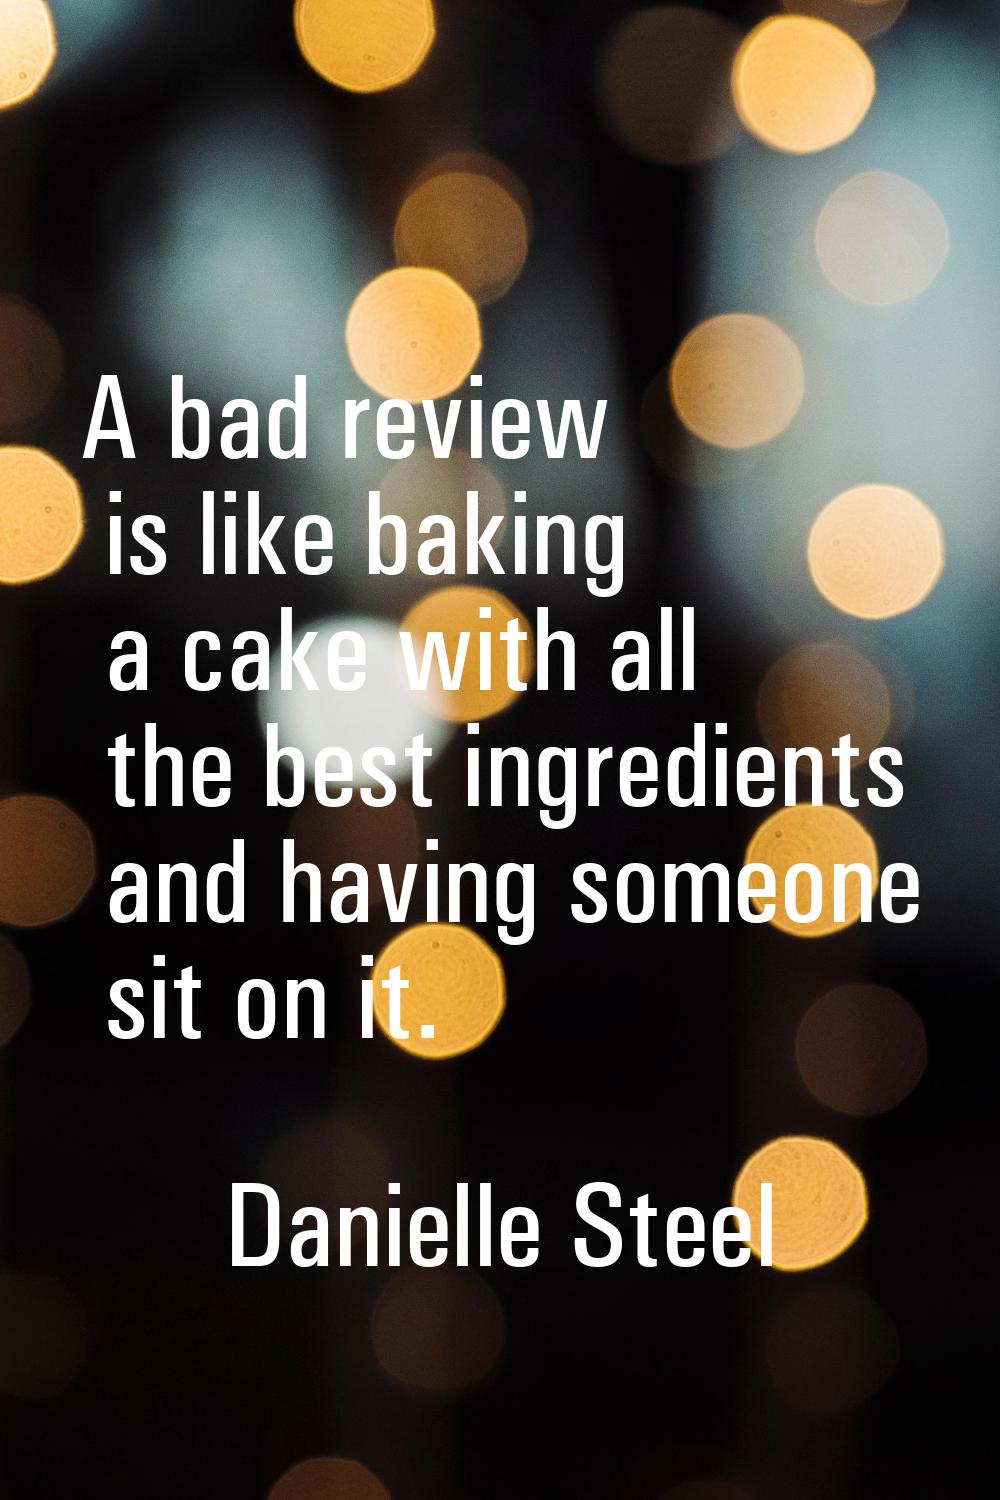 A bad review is like baking a cake with all the best ingredients and having someone sit on it.